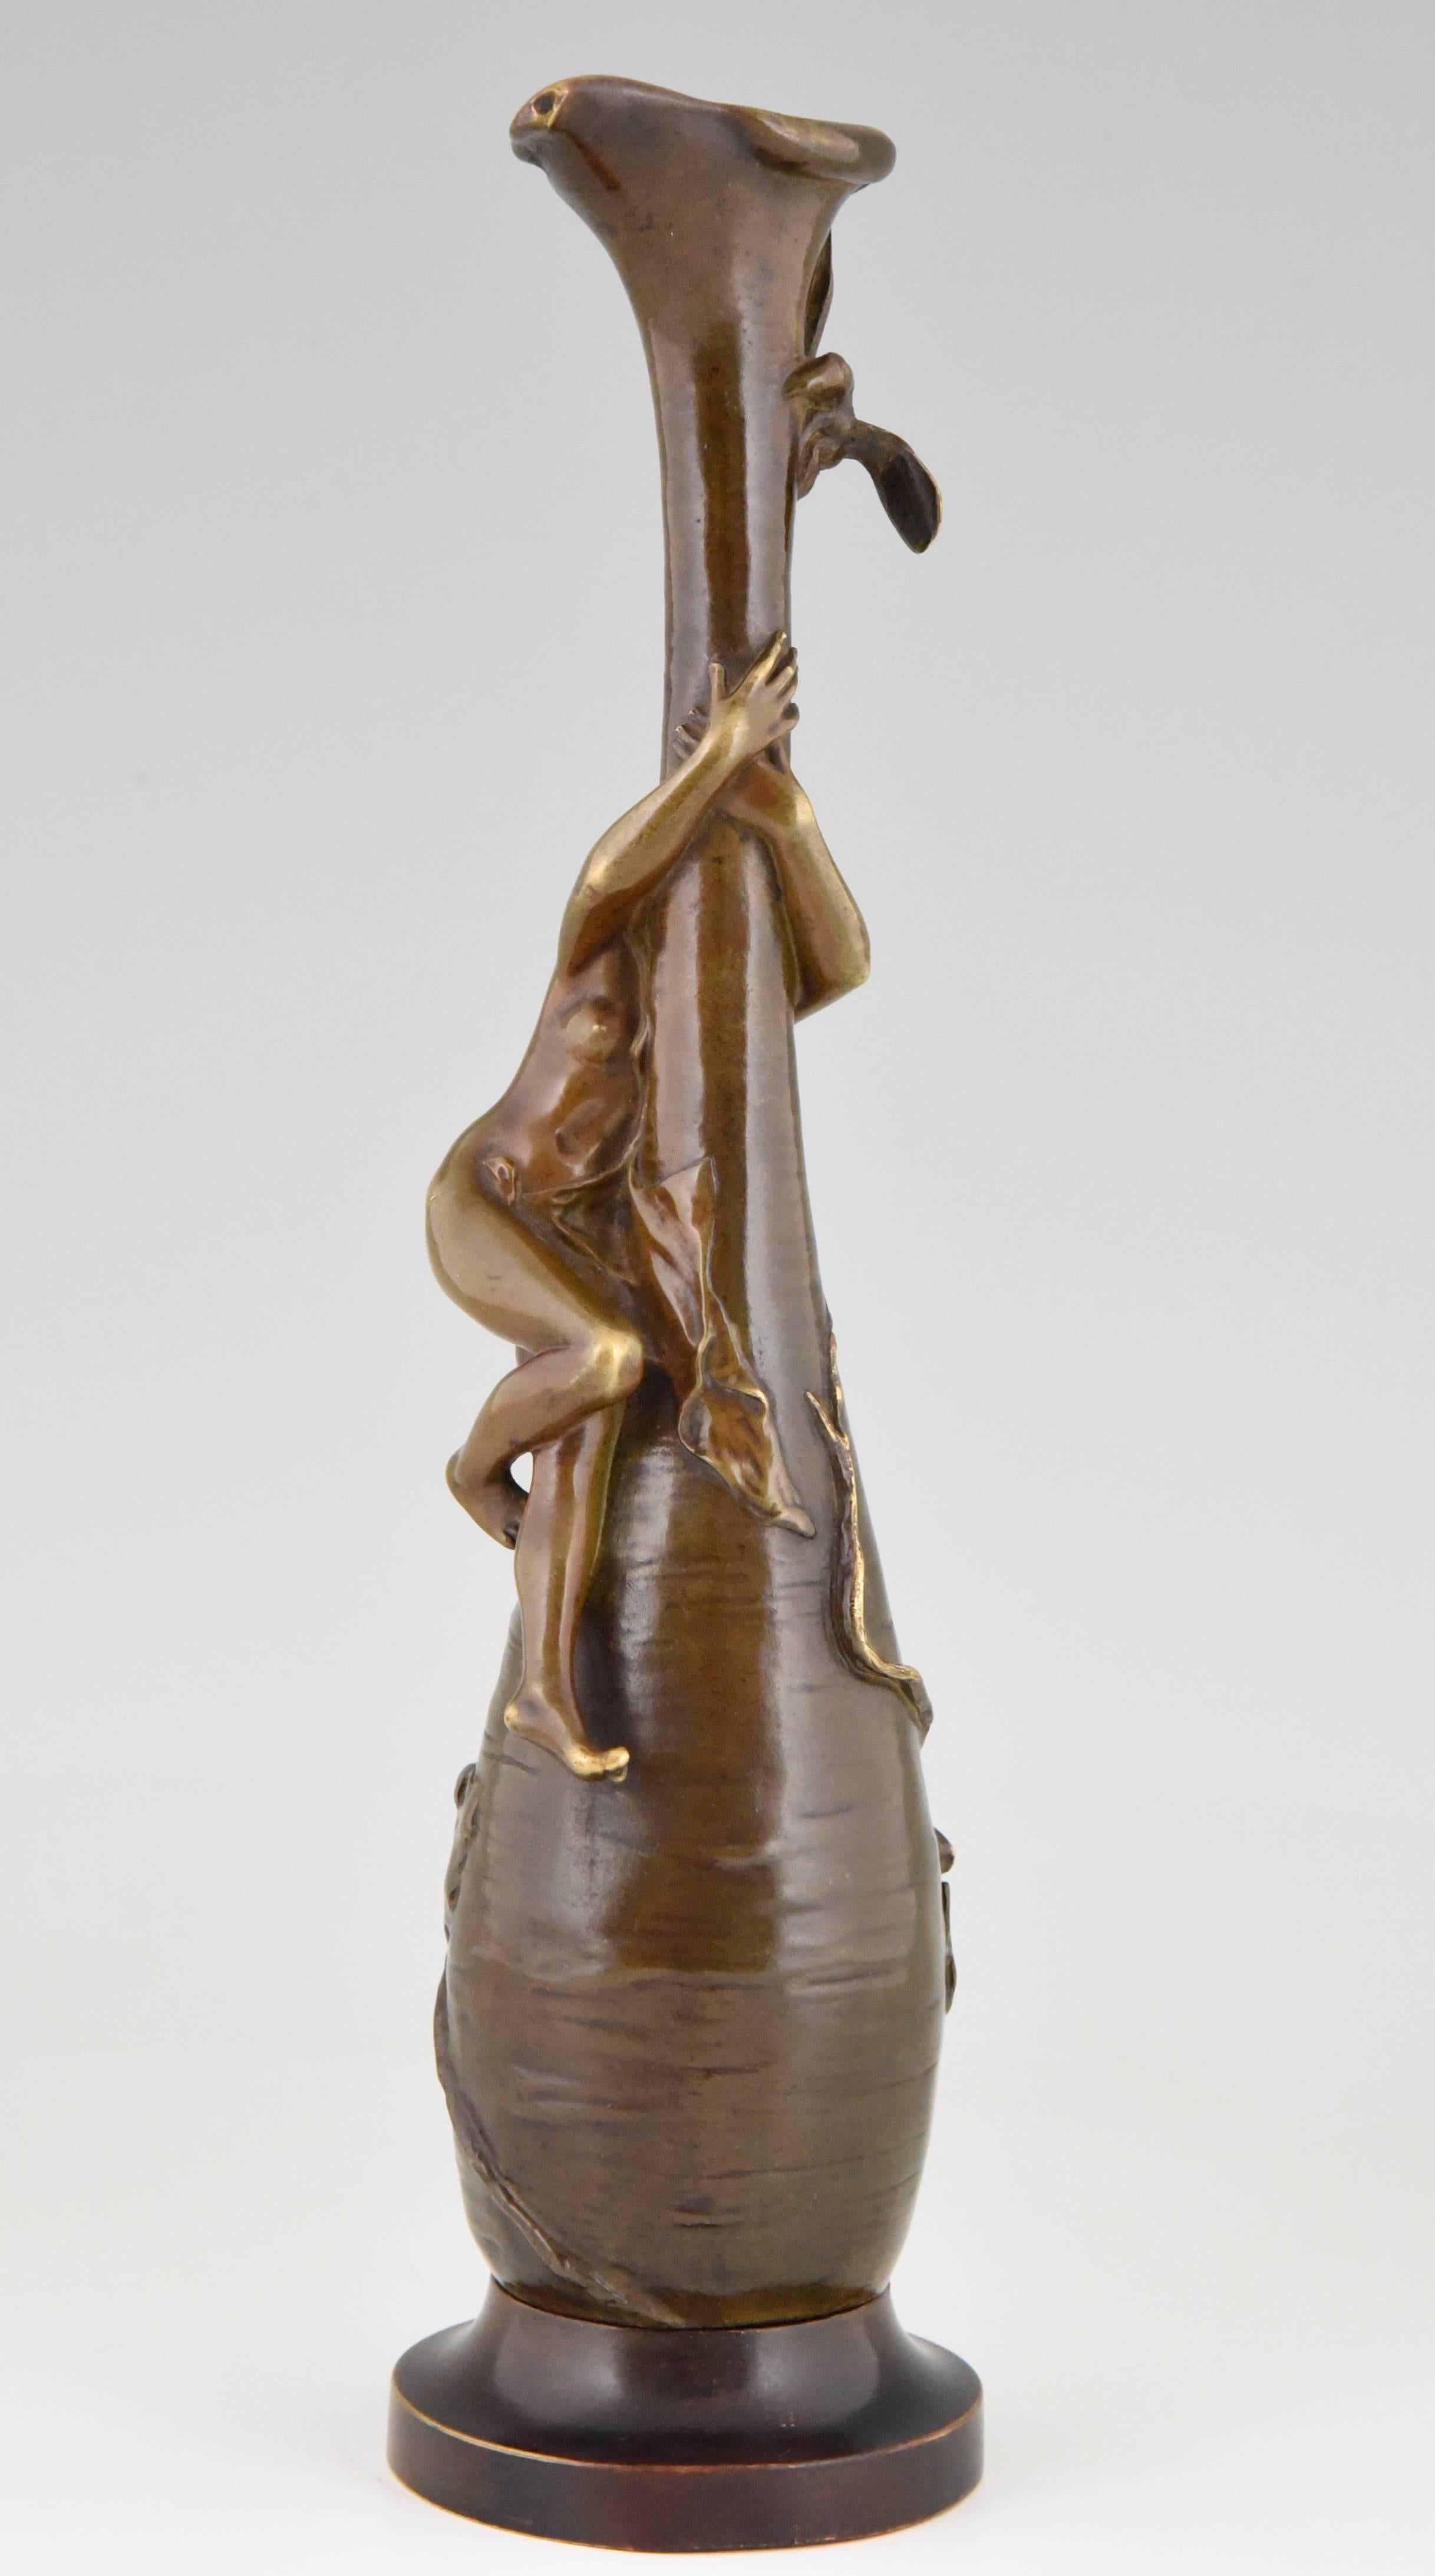 Patinated French bronze sculptural Art Nouveau vase with nude by Antoine Bofill 1900